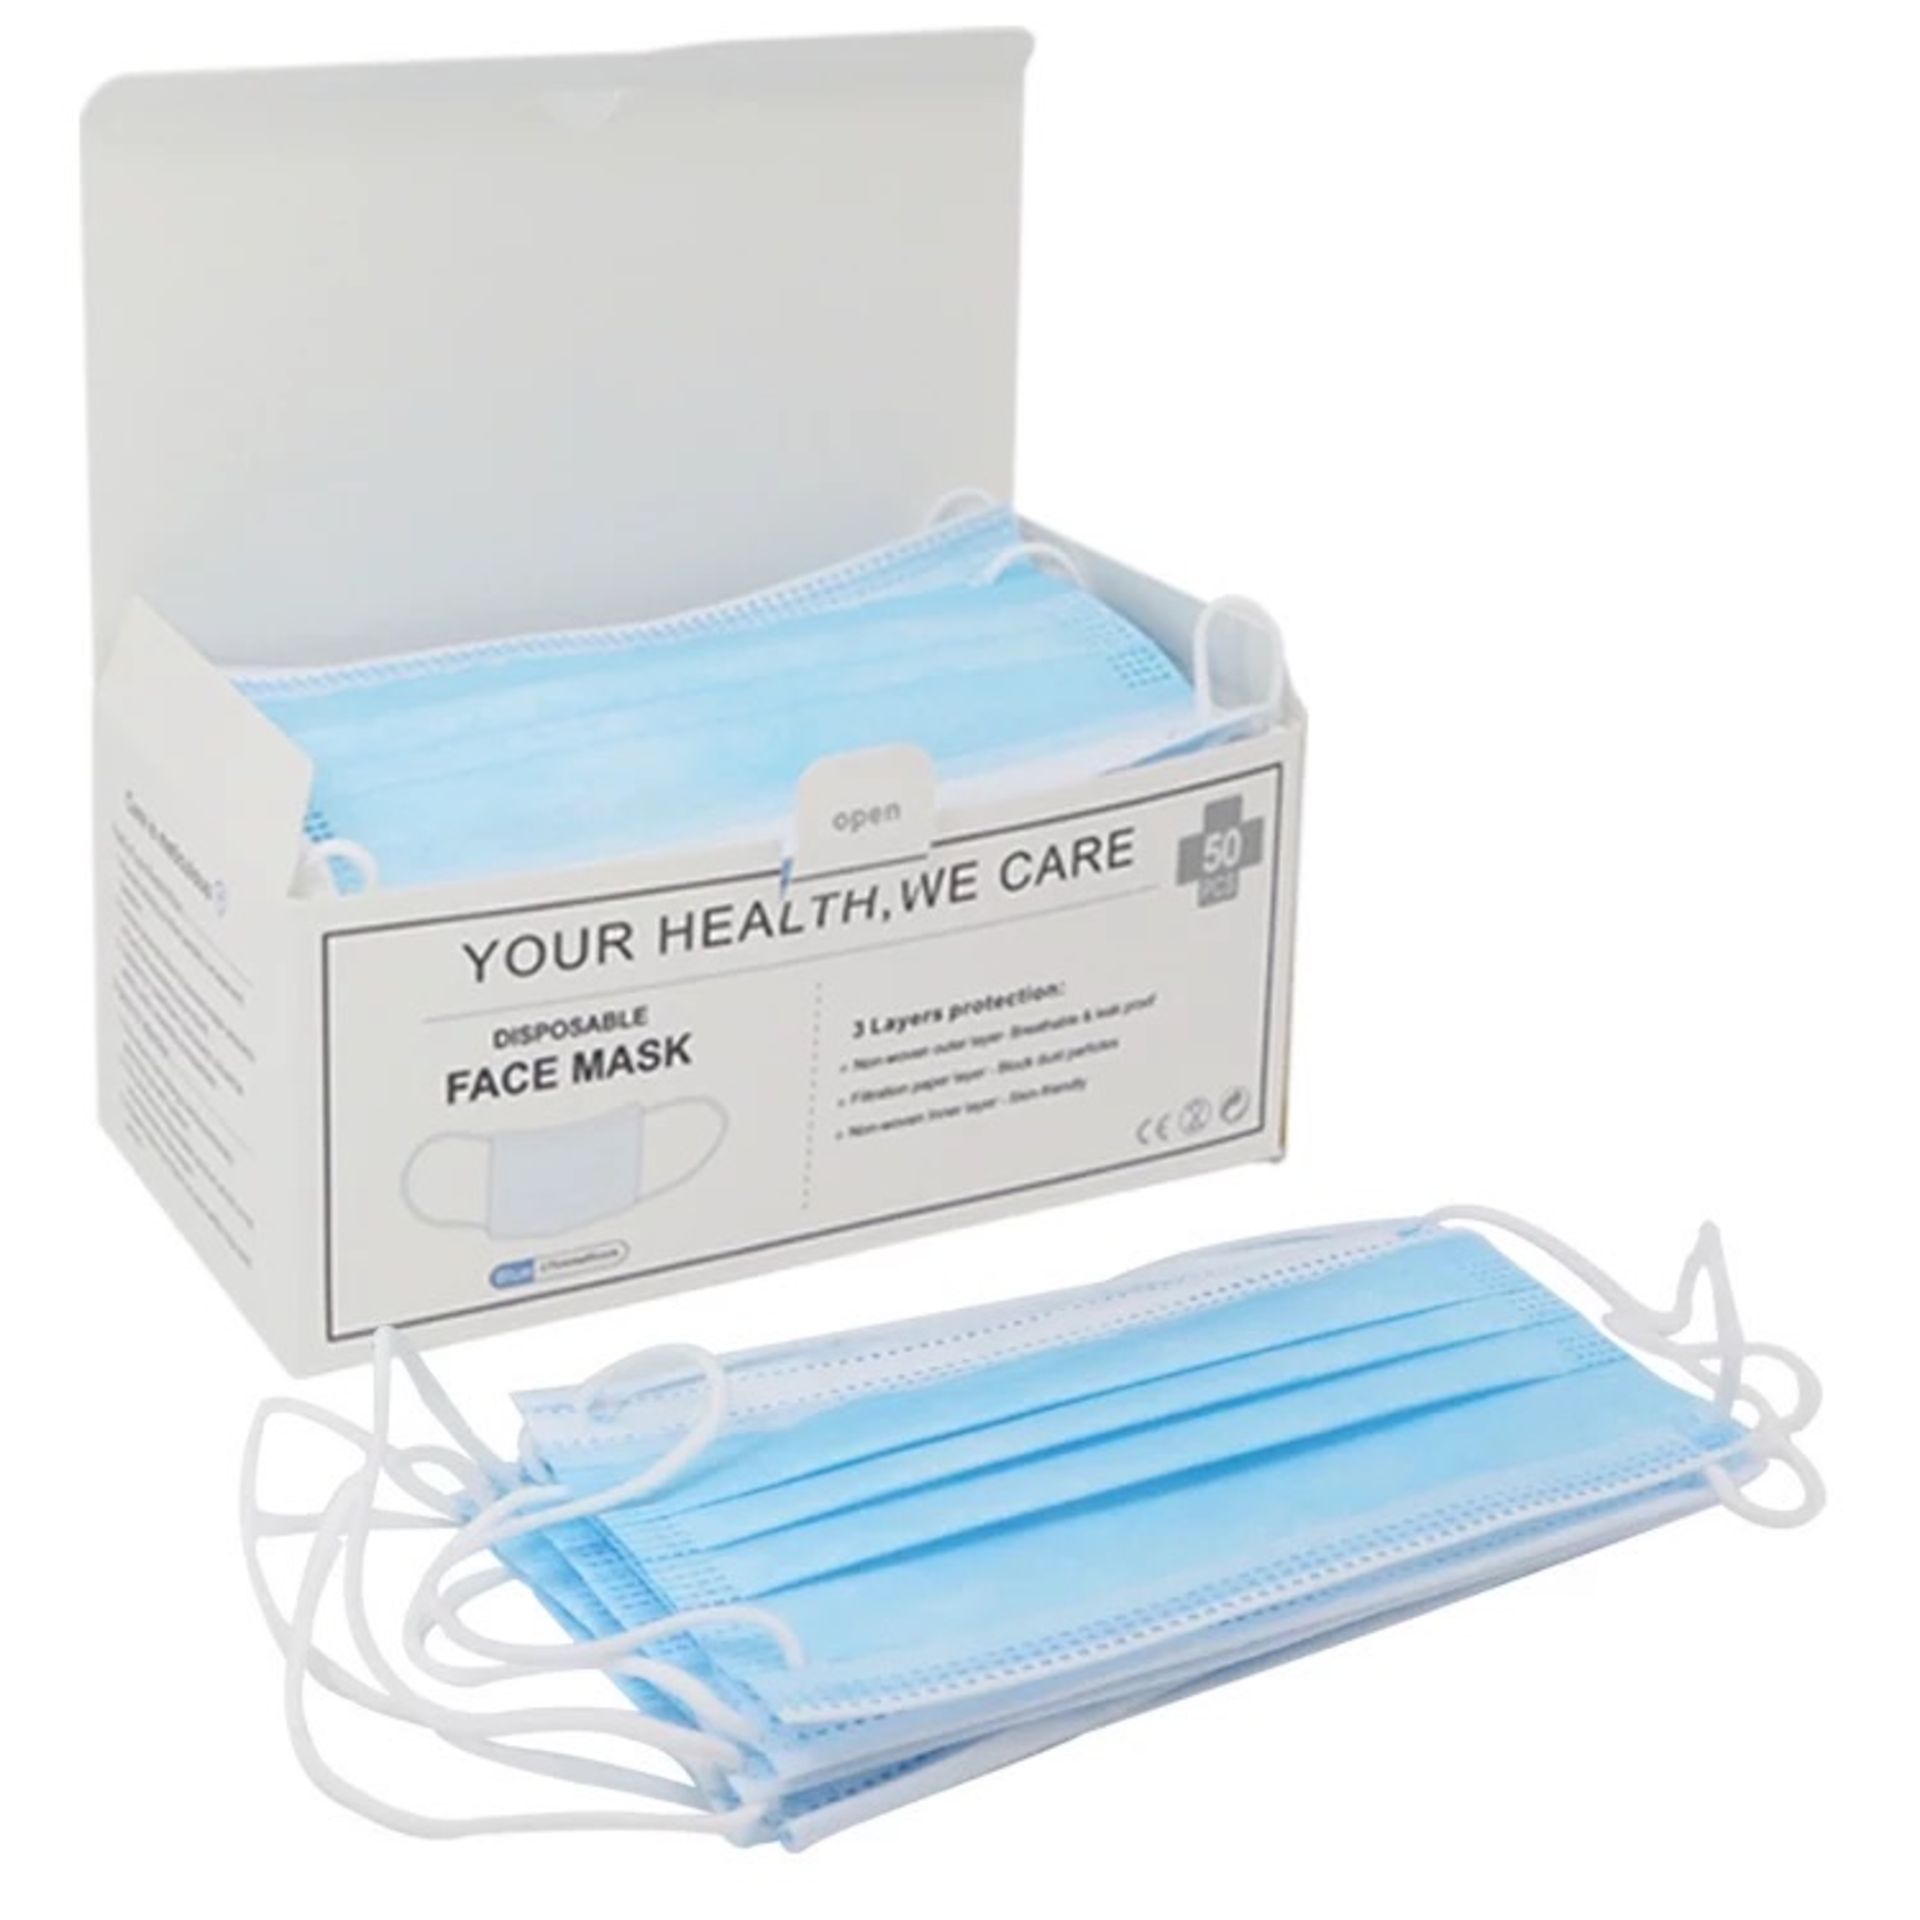 1000 x 3 Ply Blue Disposable Masks 50 Per Box - Image 3 of 4